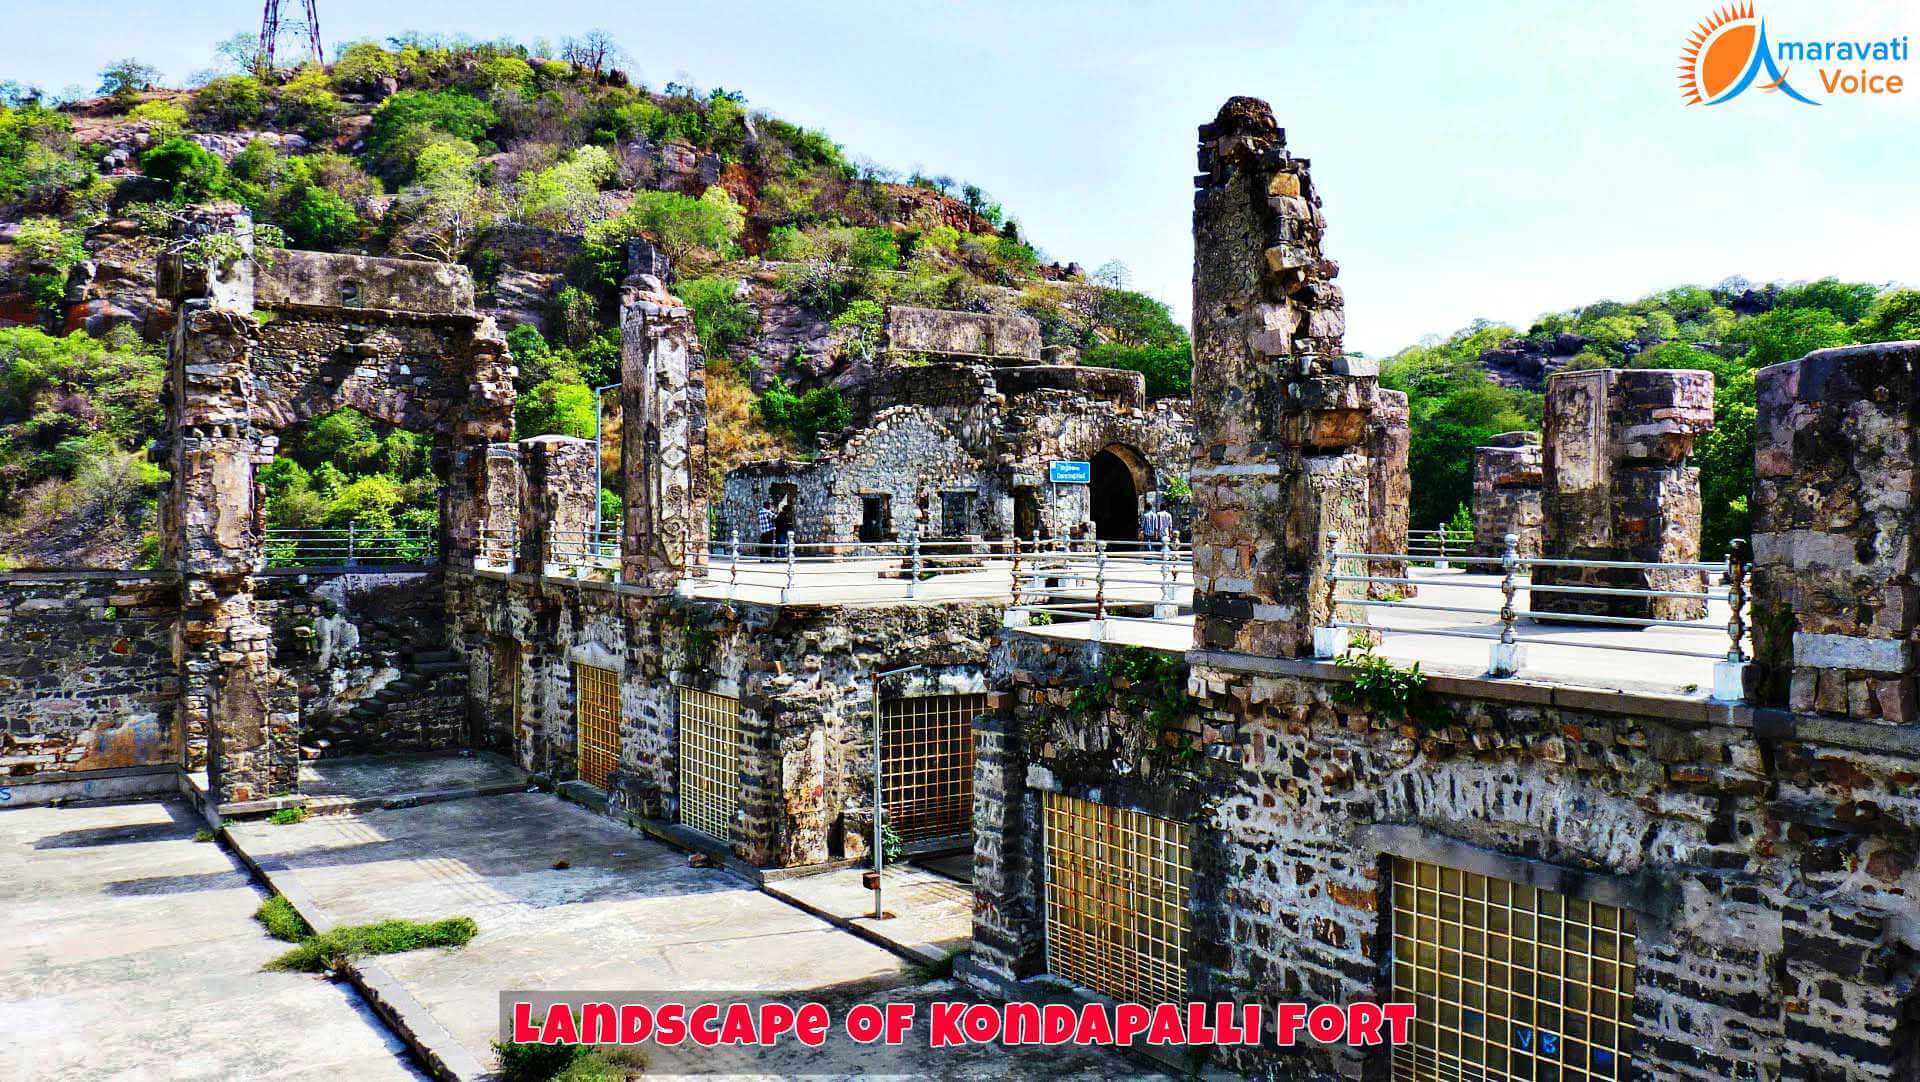 Pictures of Kondapalli Fort